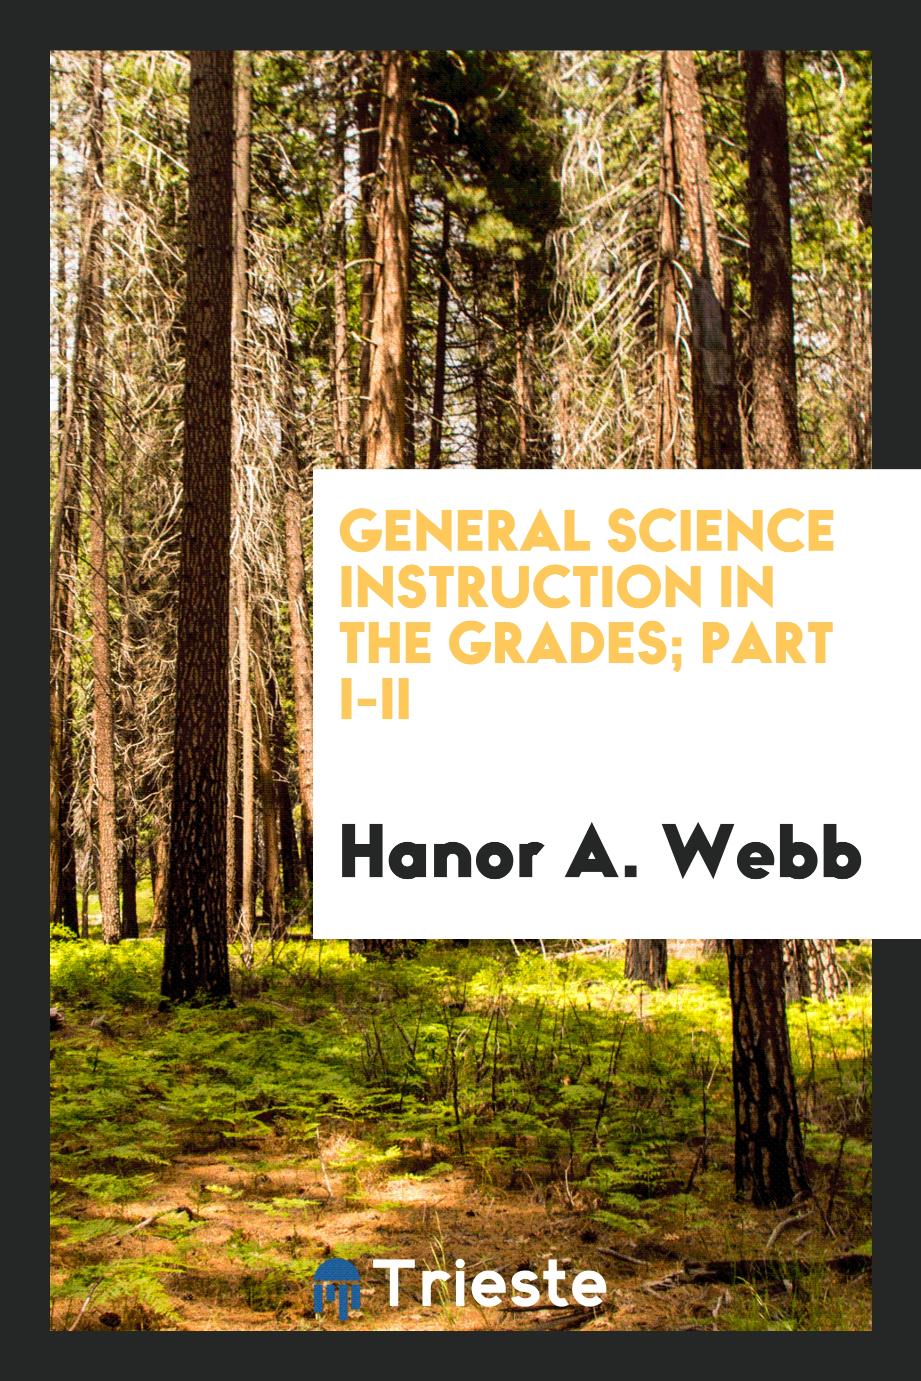 General Science Instruction in the Grades; Part I-II